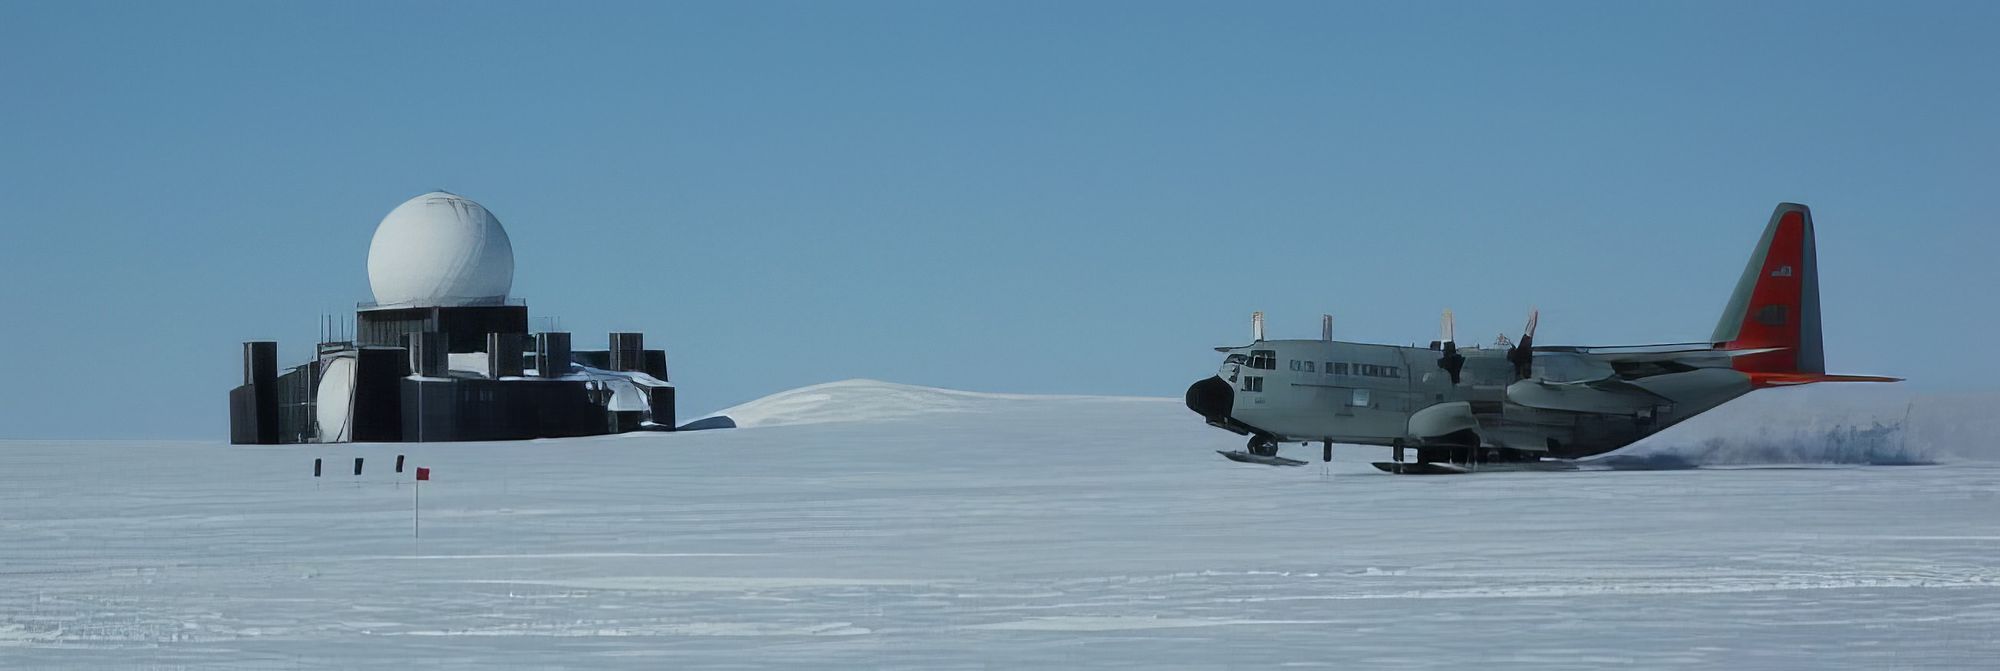 A military radar installation with a landing C-130D aircraft is landing on the right in the Iceland arctic.